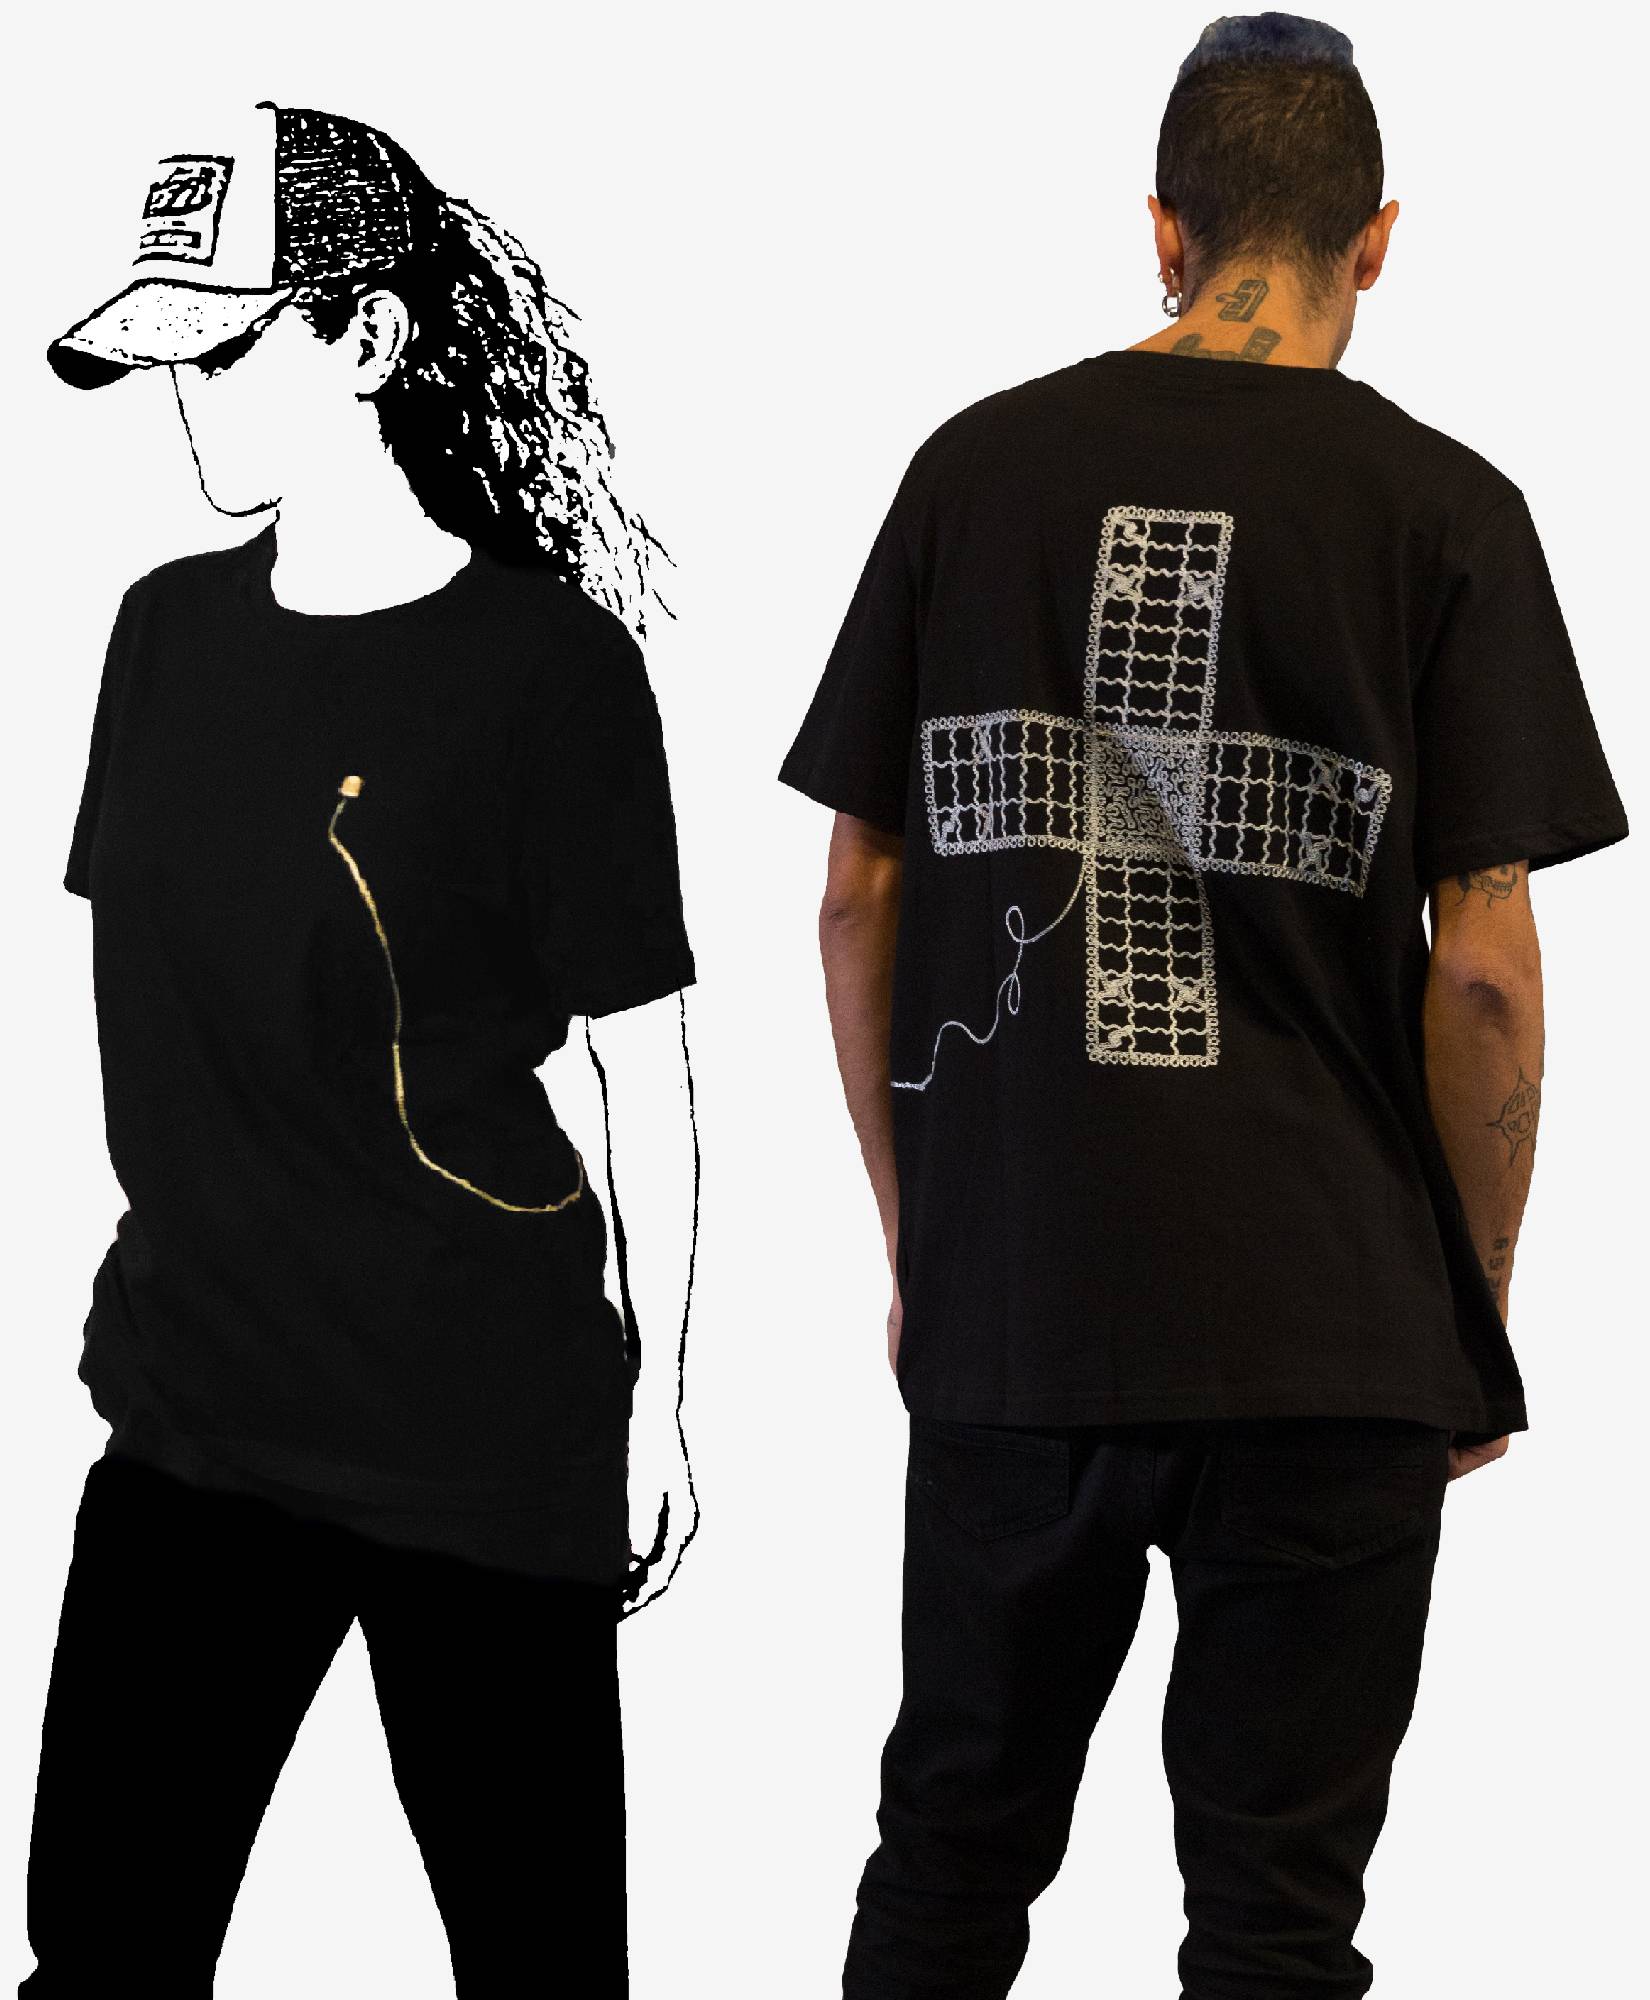 100% Cotton Black T-shirt - Embroidered T-shirt + Traditional Board Game Barjees